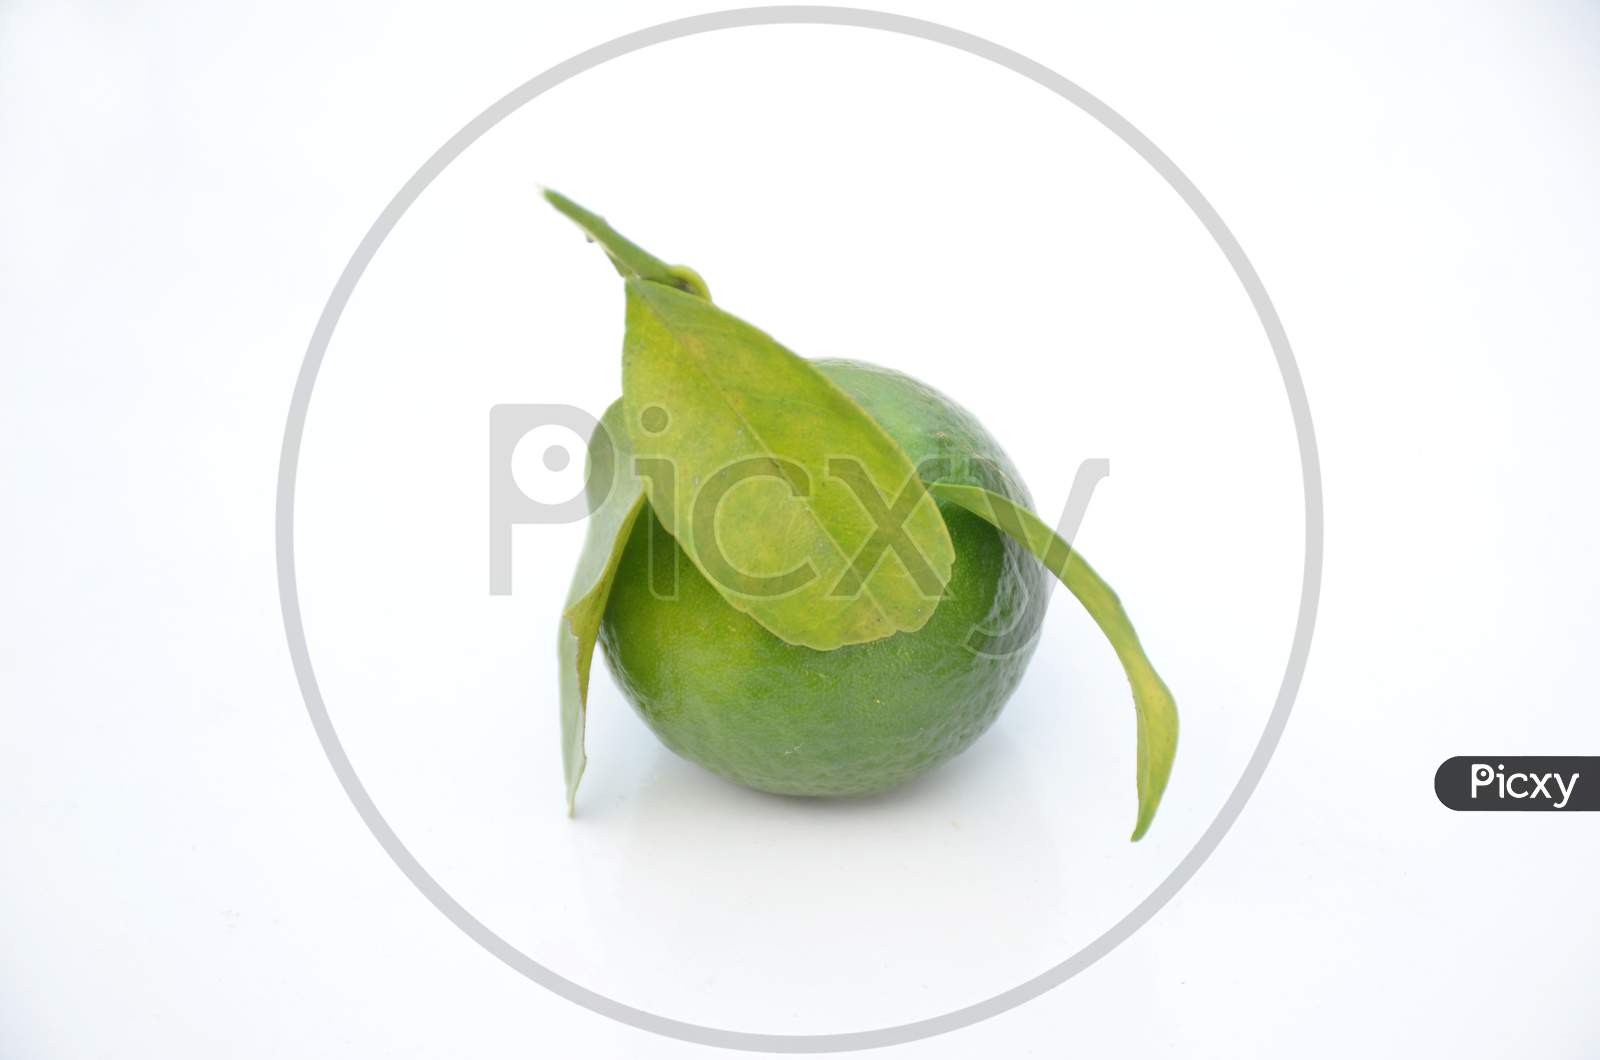 The Ripe Green Orange Fruit With Leaves Isolated On White Background.